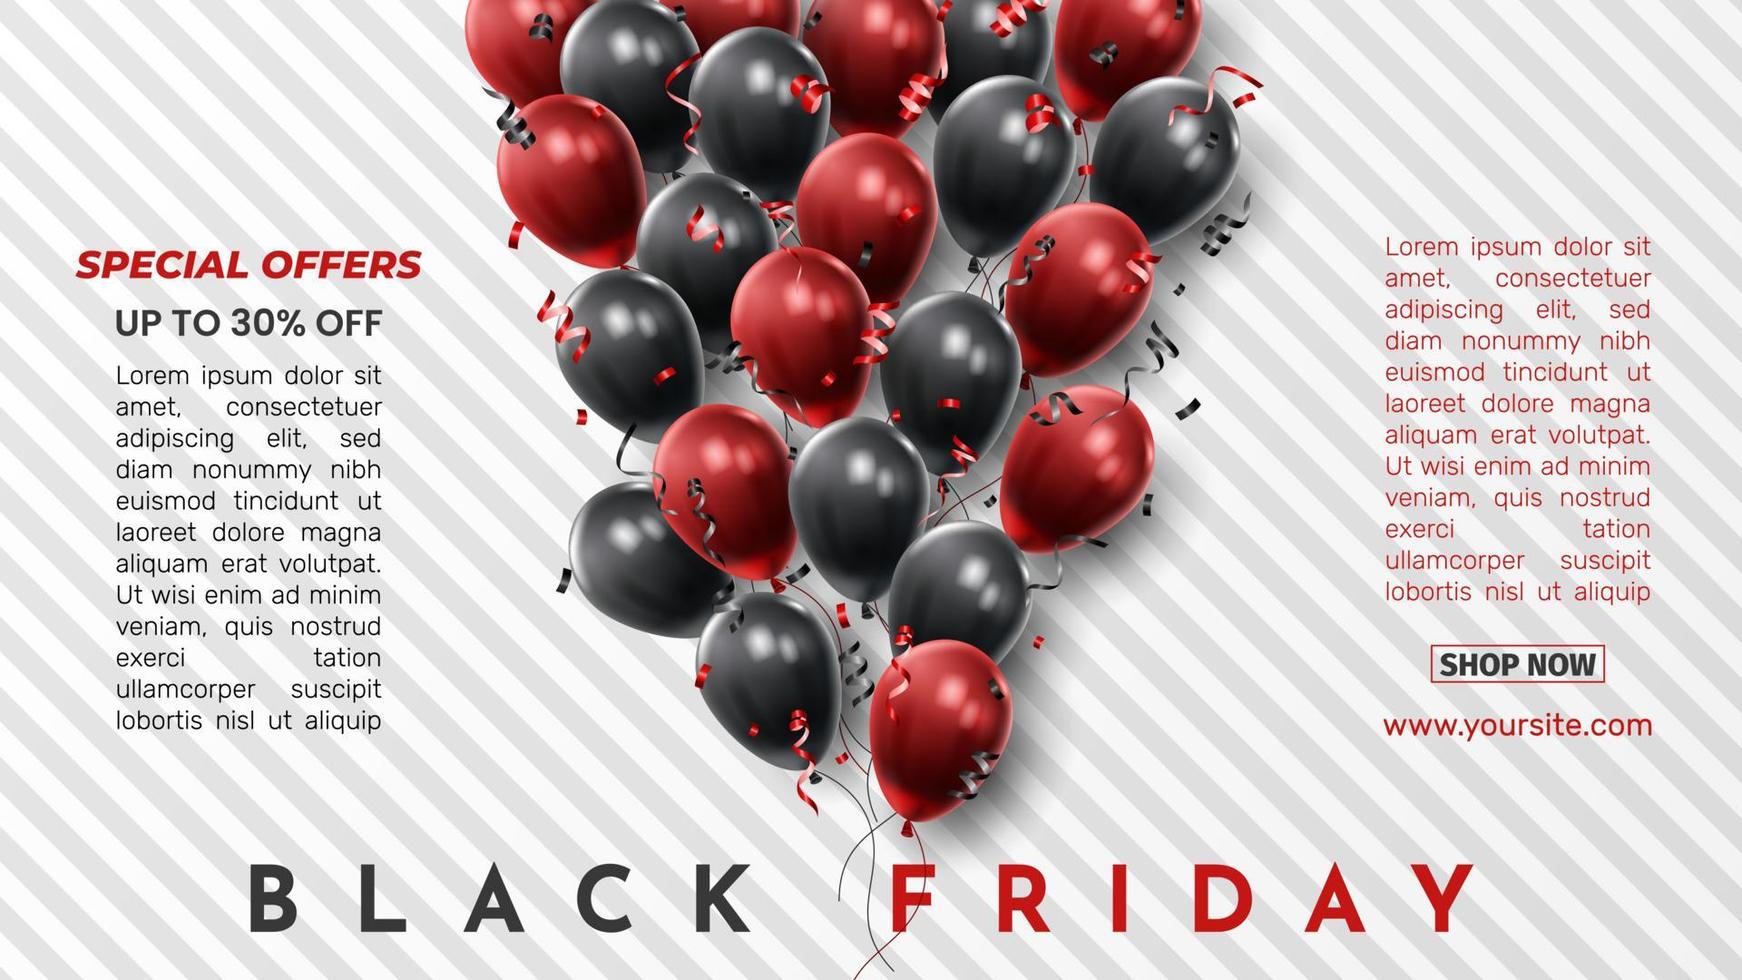 Black Friday Sale Poster with Shiny Balloons on Black and White Background. Universal vector background for poster, banners, flyers, card. vector illustration